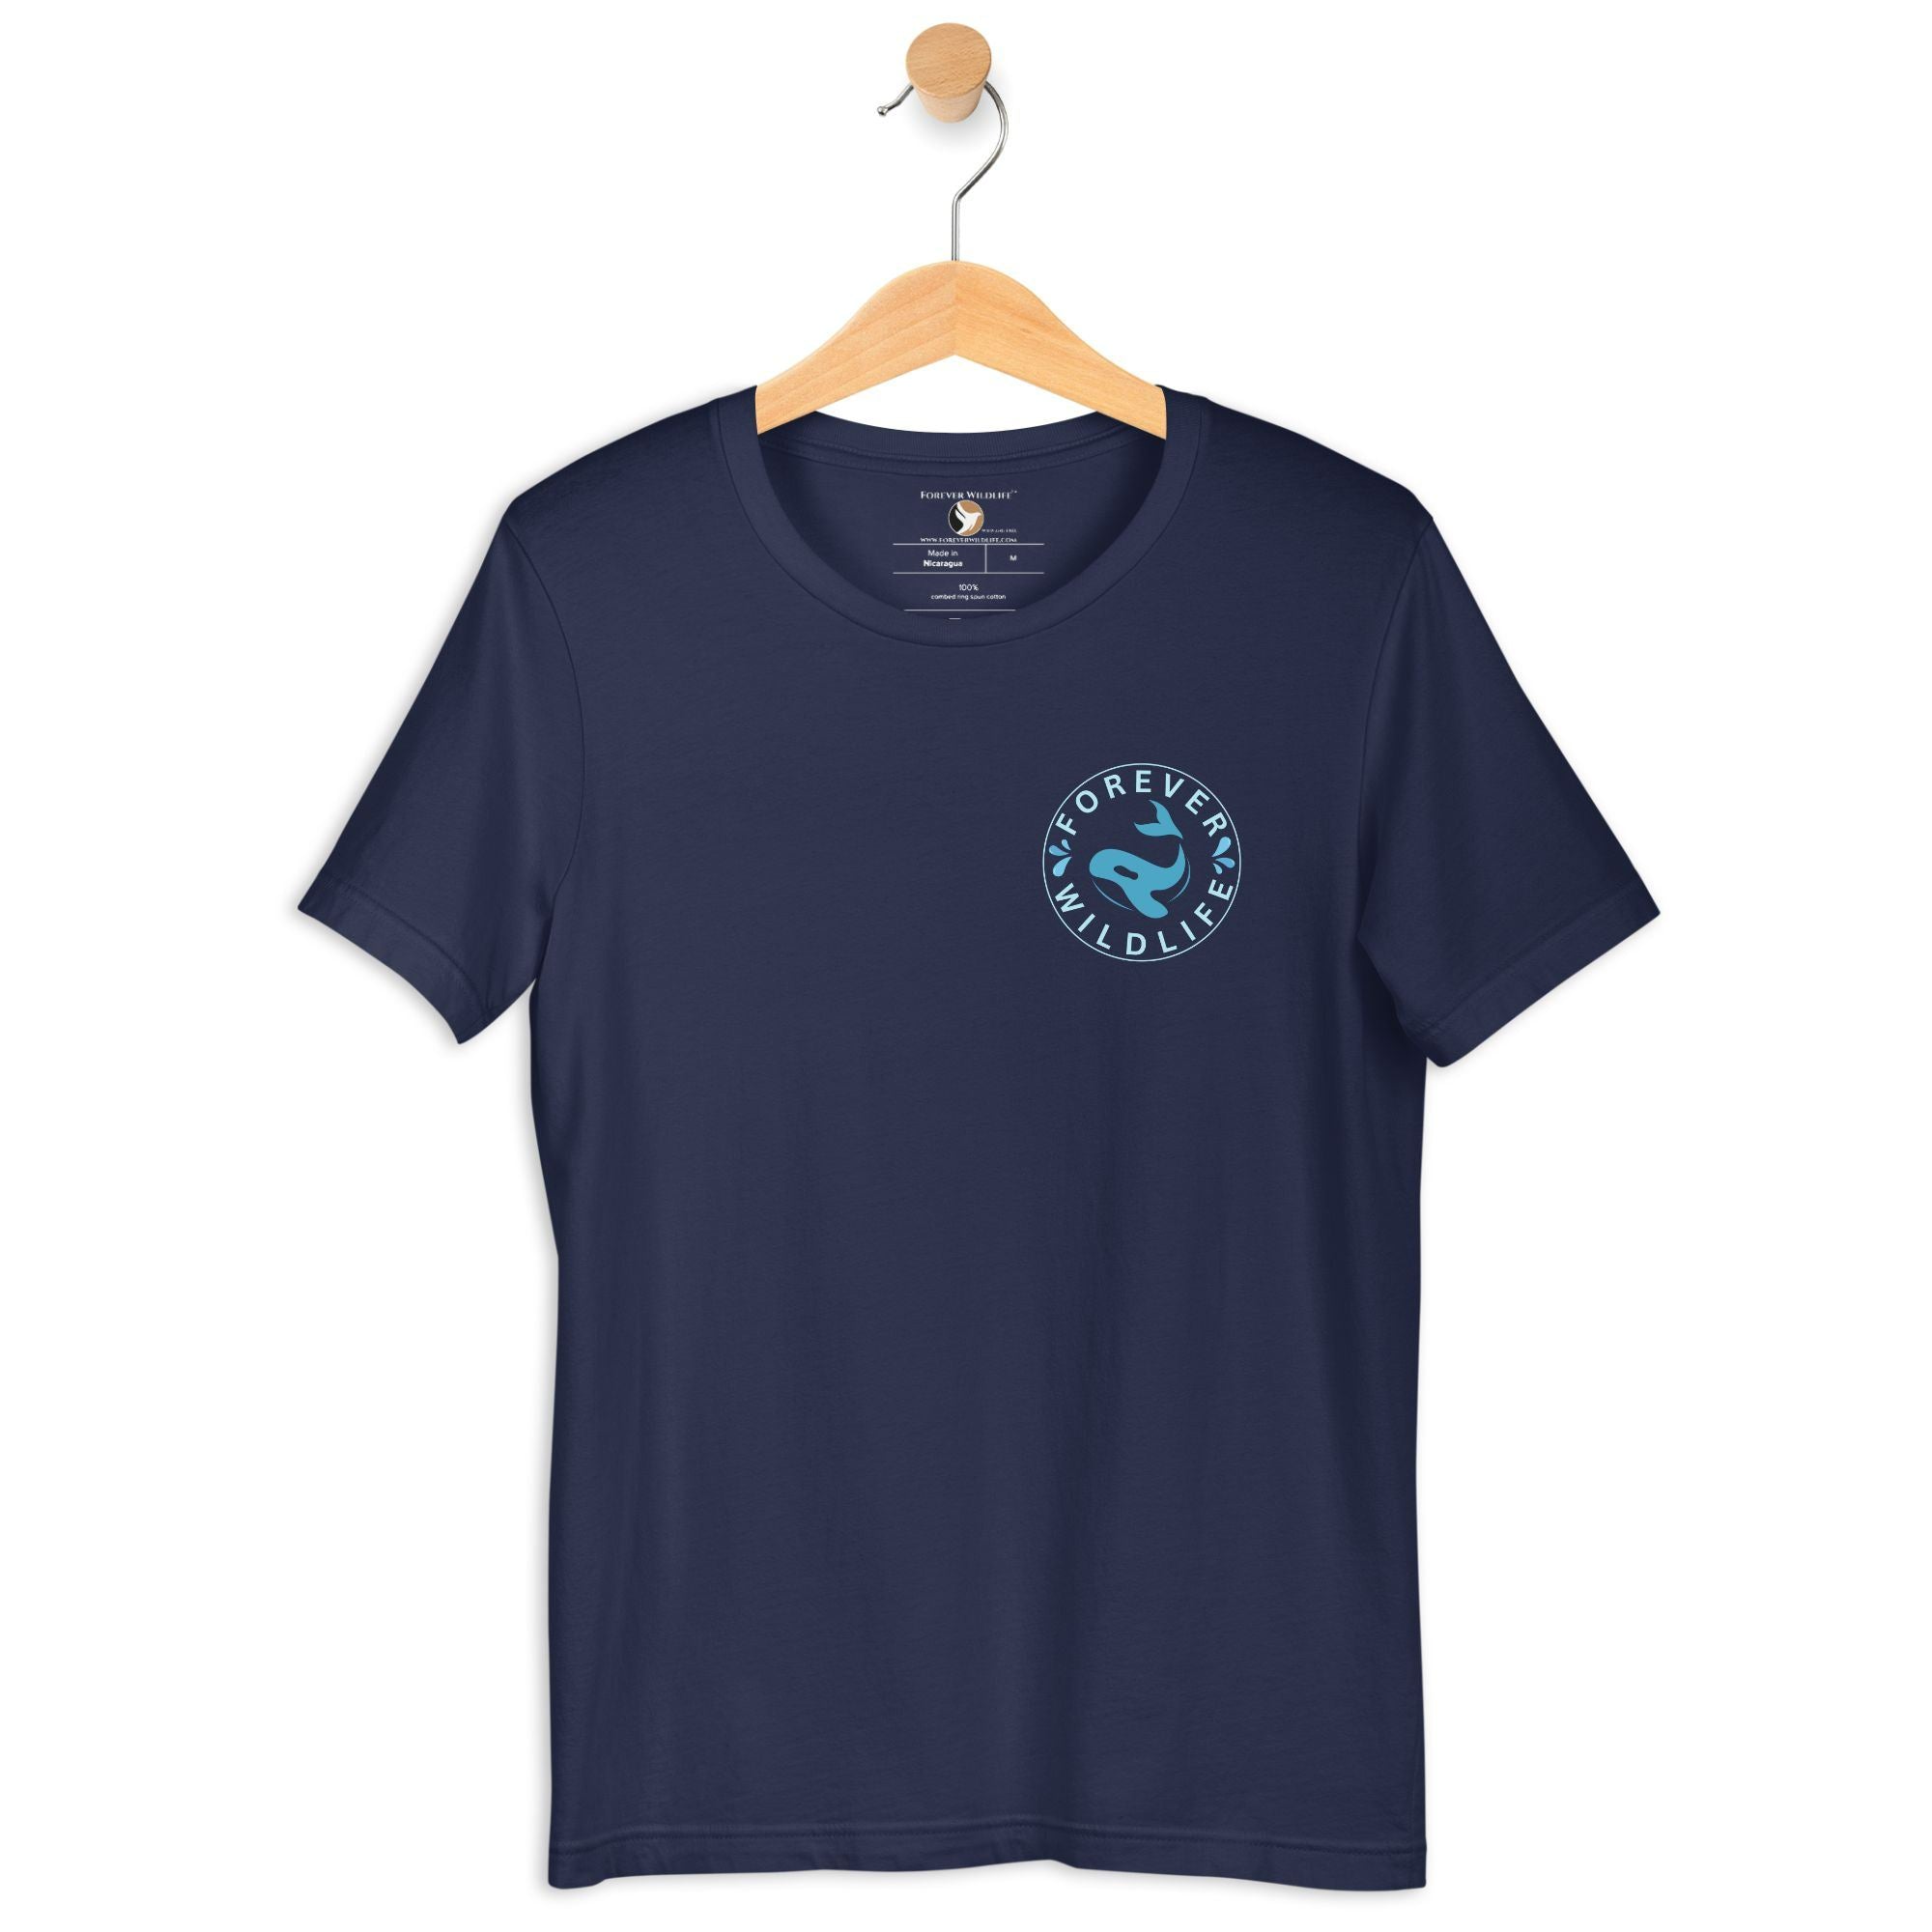 Orca Shirt, beautiful Navy Orca T-Shirt with Killer Whales on the shirt by Forever Wildlife selling Wildlife T Shirts.